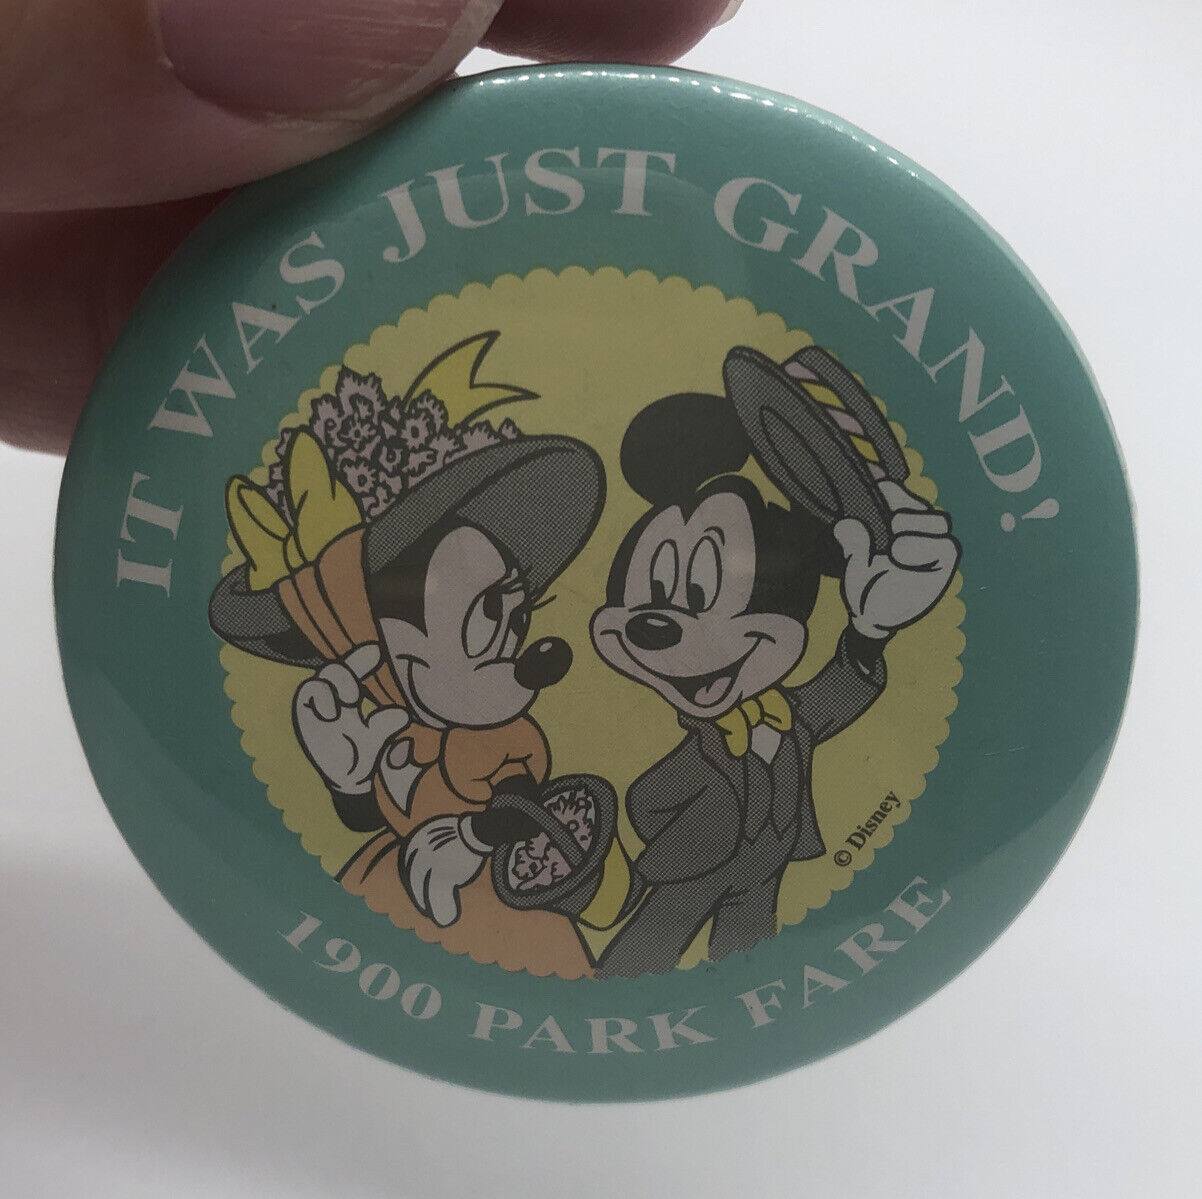 Primary image for Disney Grand Floridian 1900 Park Fare Mickey and Minnie Pin